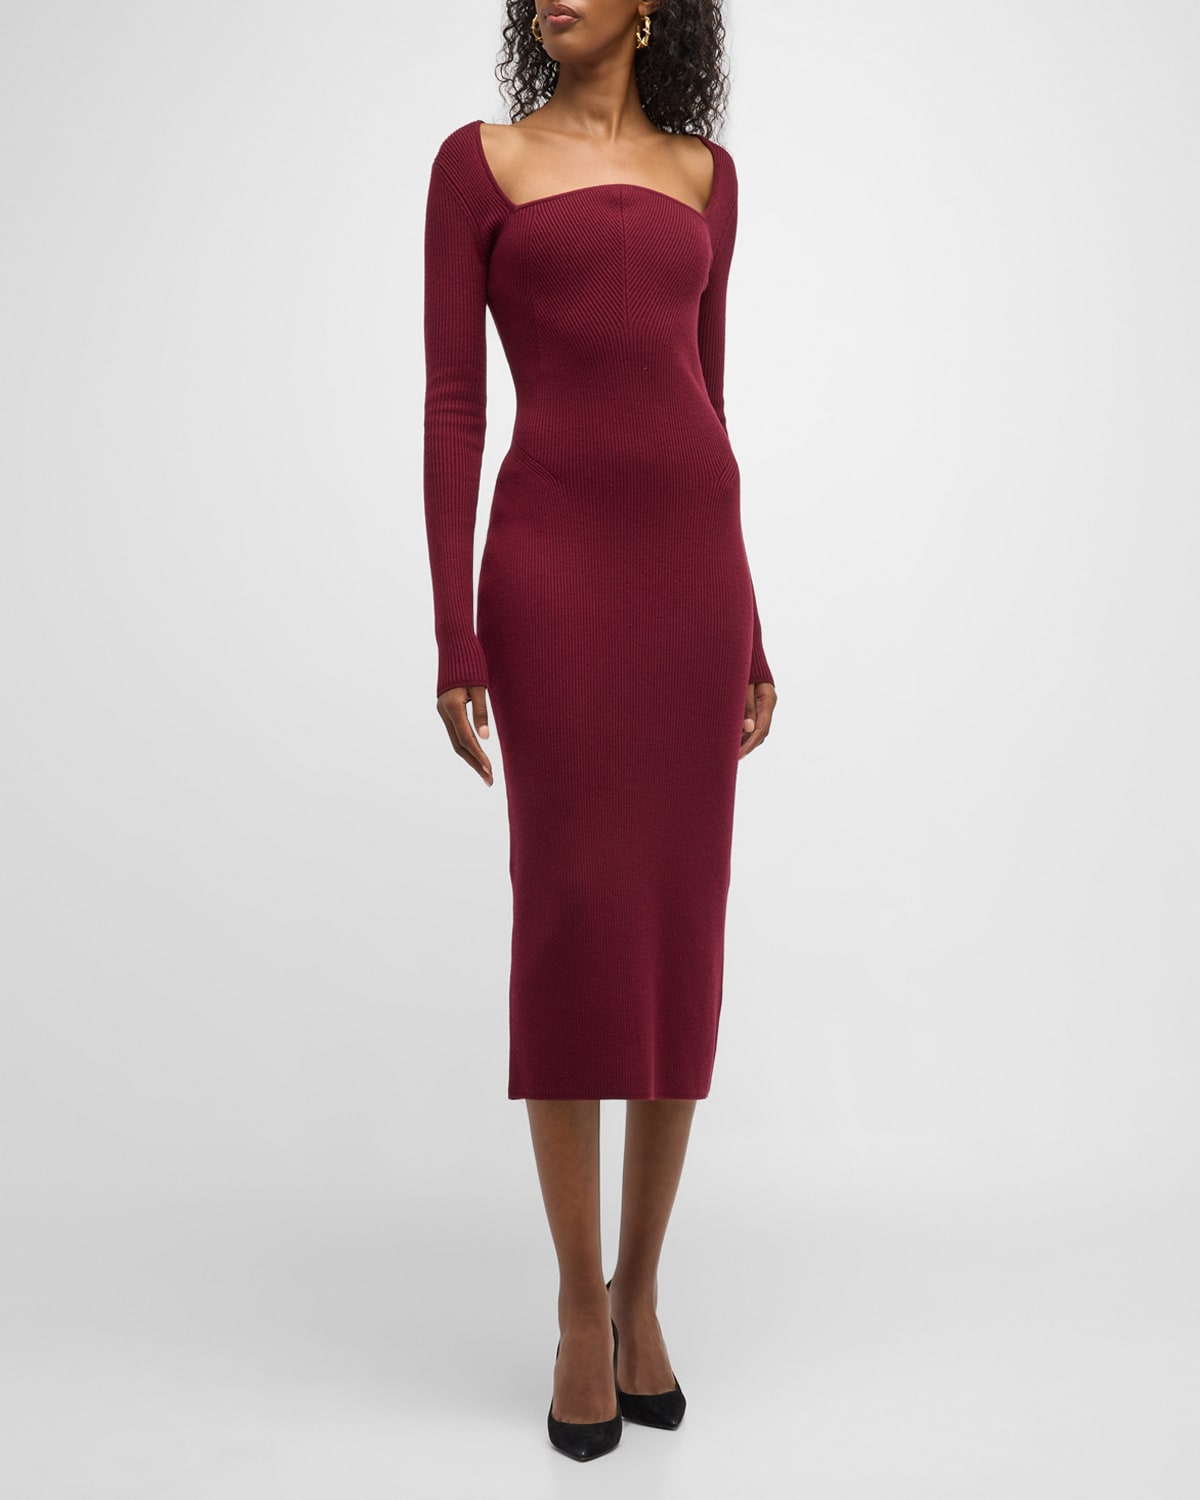 Ribbed Knit Dress | Neiman Marcus